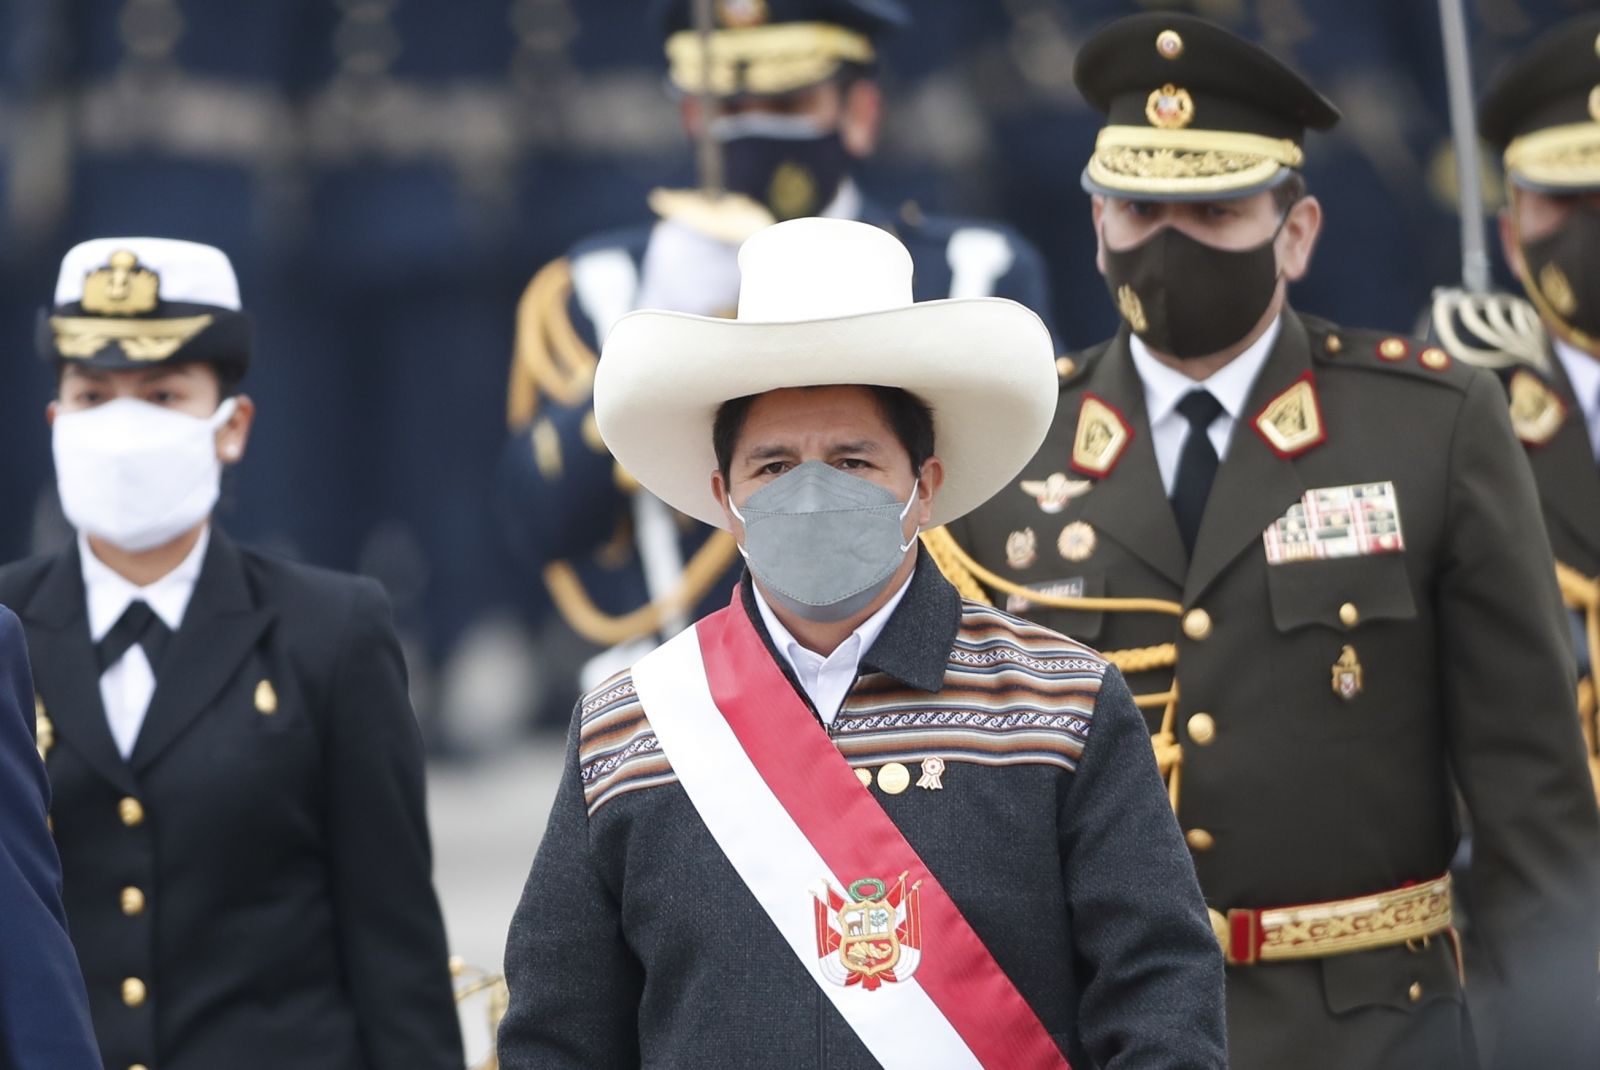 Peruvian president sworn in as ministers of economy and justice